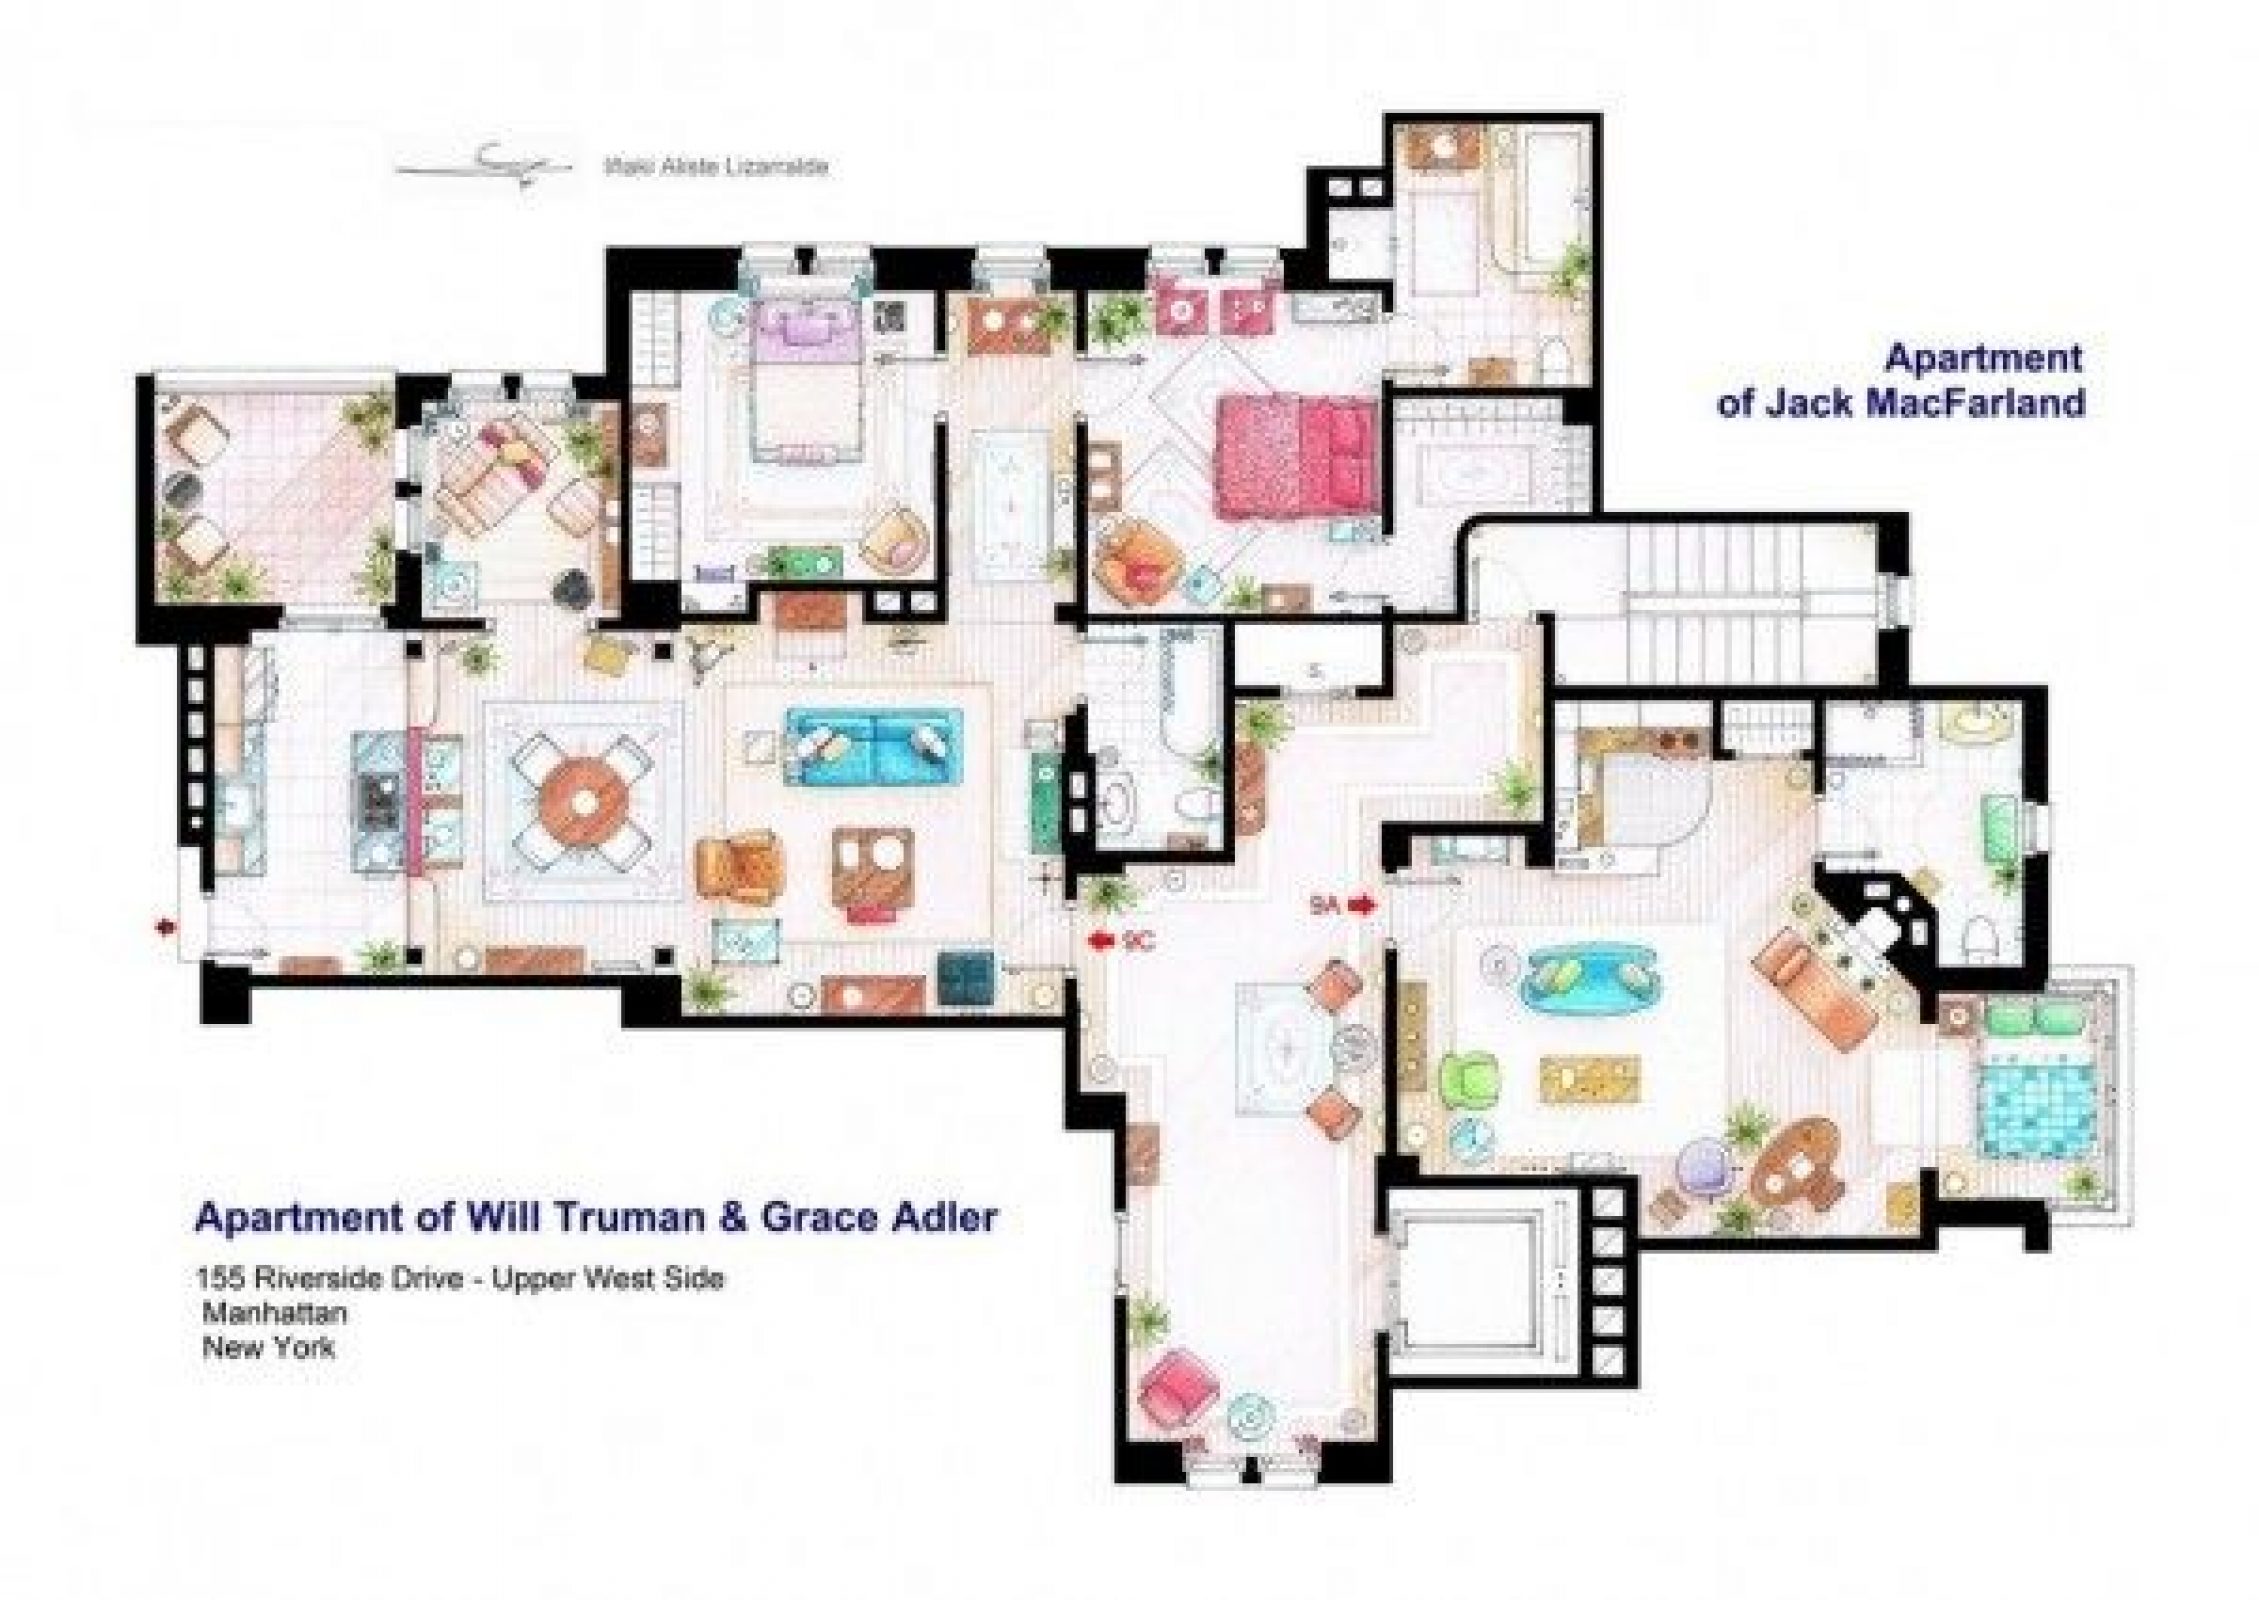 25 Perfectly Detailed Floor Plans of Homes from Popular TV Shows